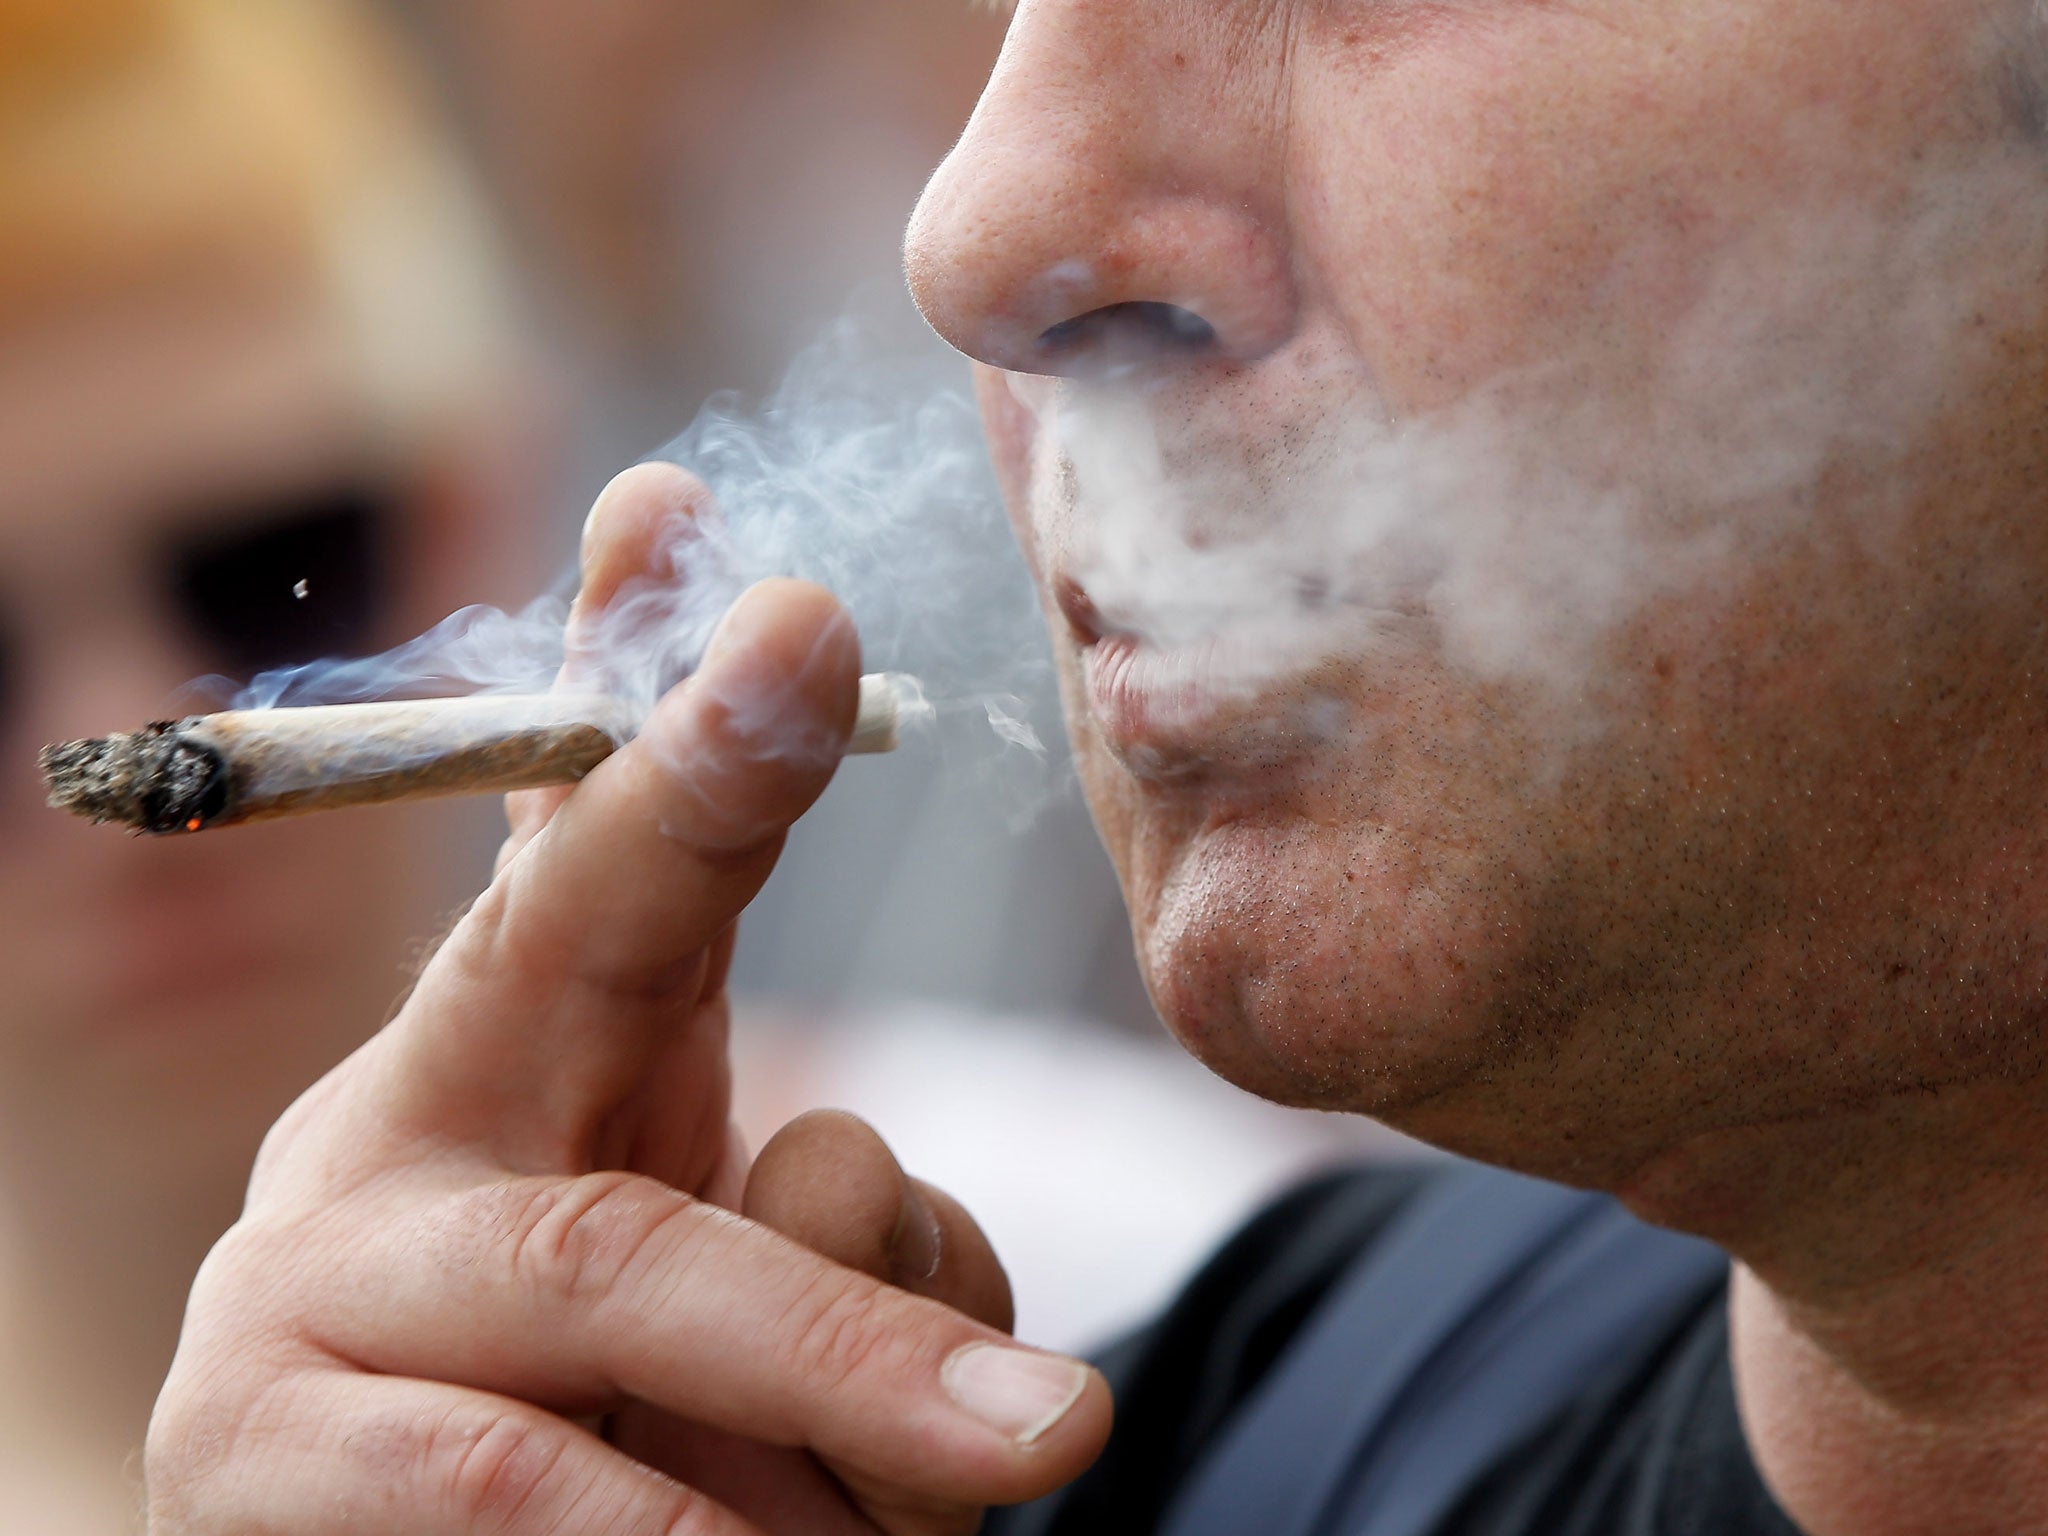 A man smokes licenced medicinal marijuana prior to participating in the annual Hemp Parade, or 'Hanfparade', in support of the legalization of marijuana in Germany on August 7, 2010 in Berlin, Germany. The consumption of cannabis in Germany is legal, thou